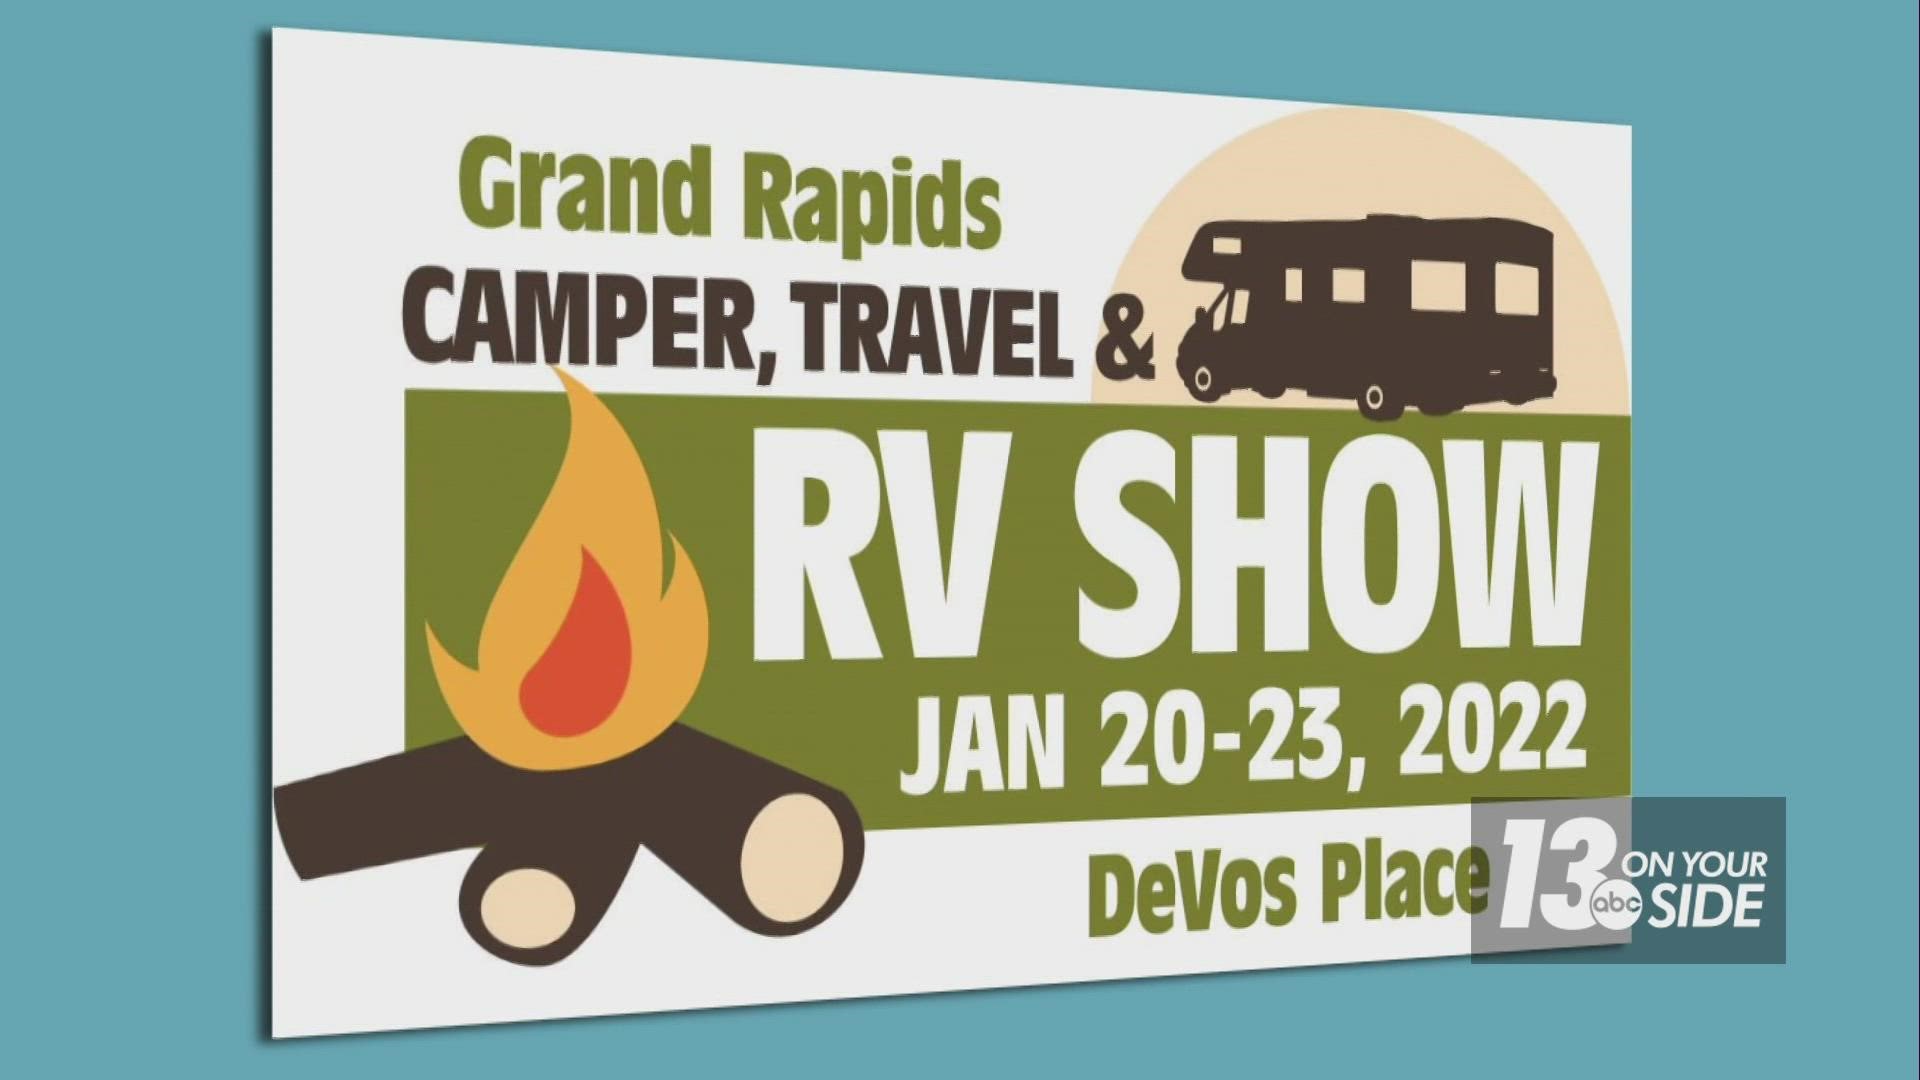 The Grand Rapids Camper, Travel & RV Show is at DeVos Place in Grand Rapids, Jan. 20-23.